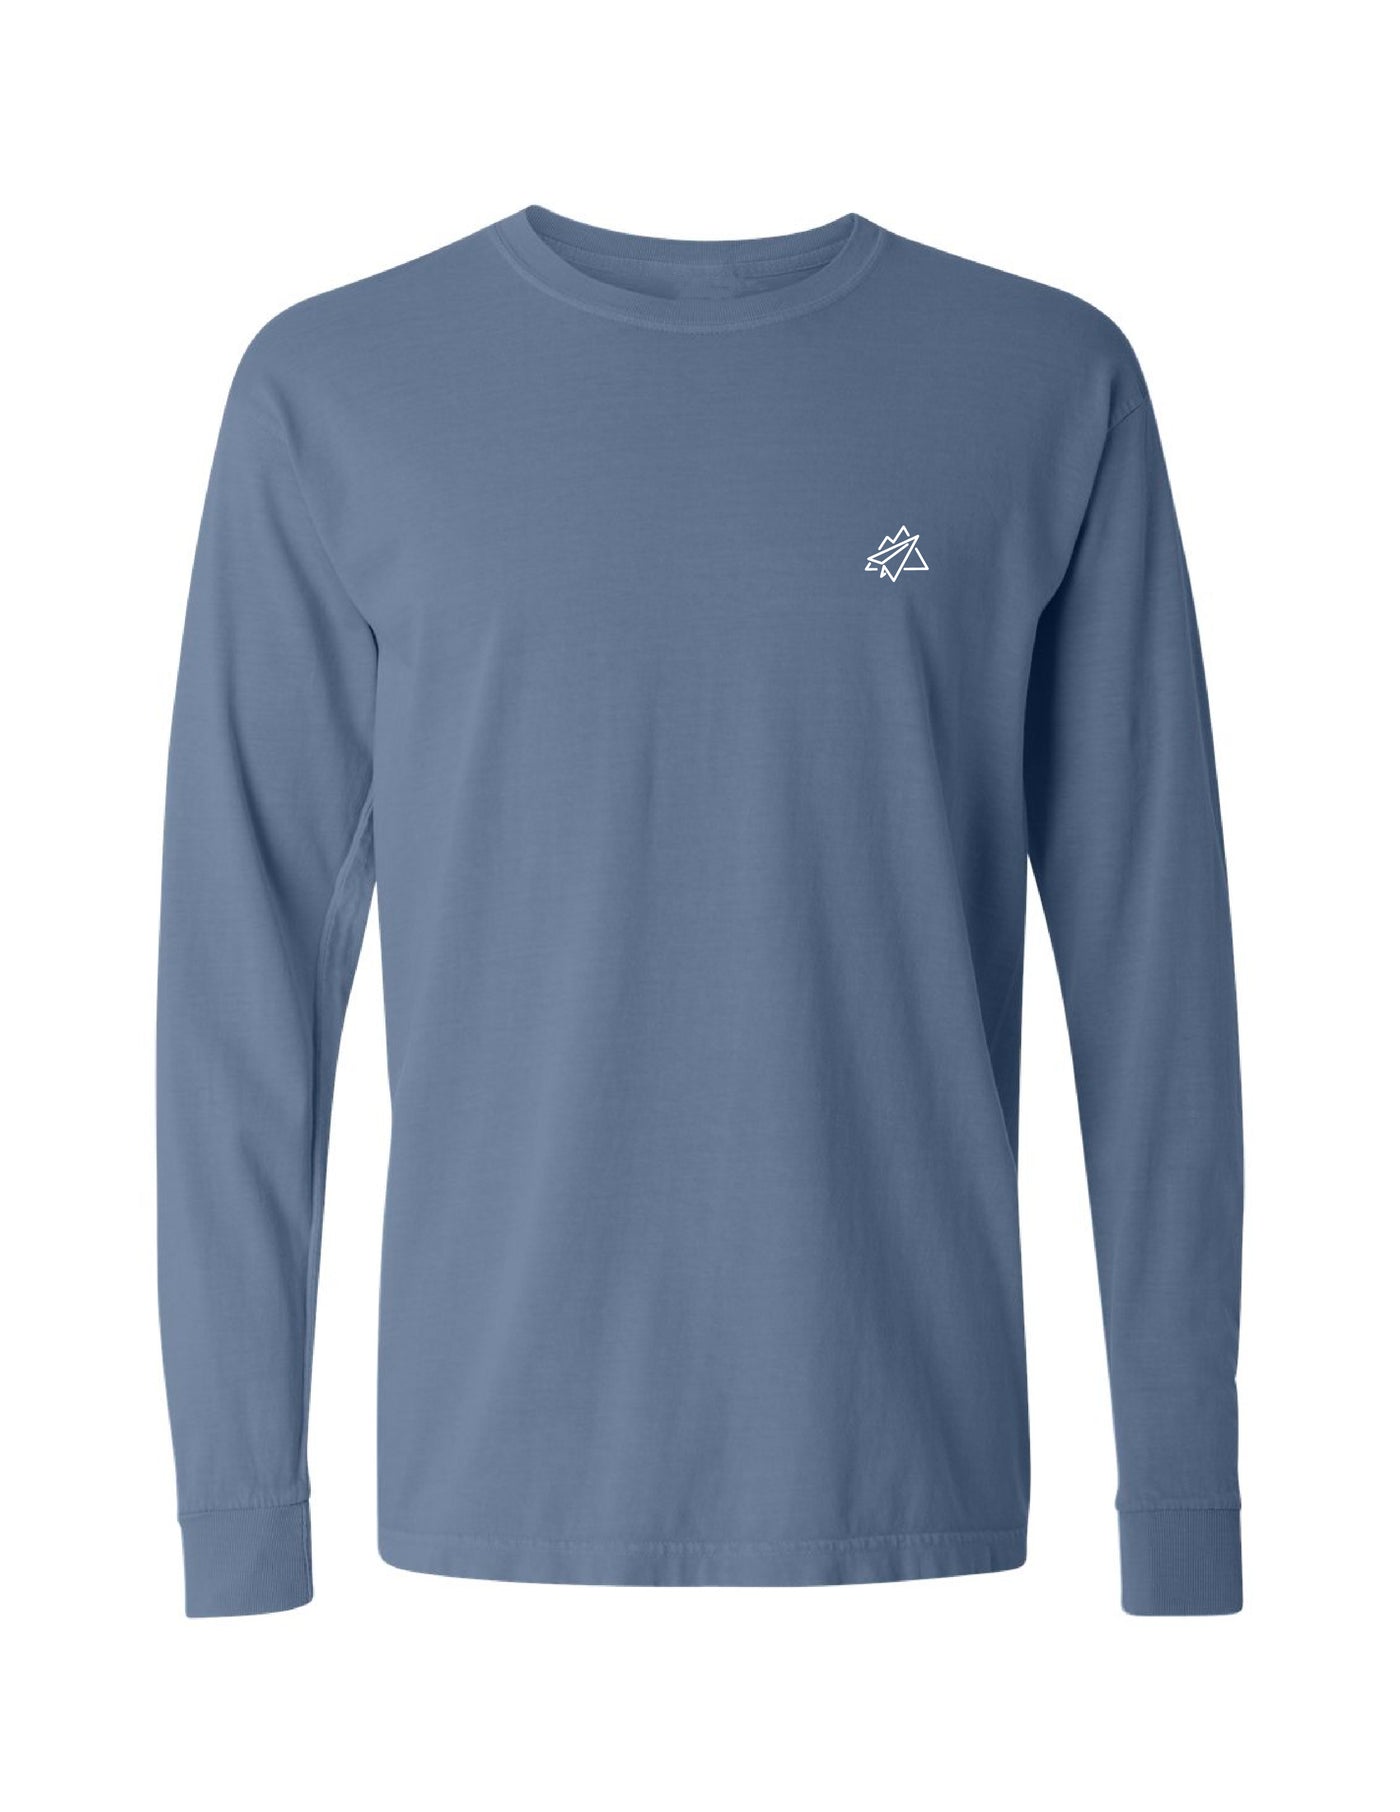 Good Places Long Sleeve - Blue